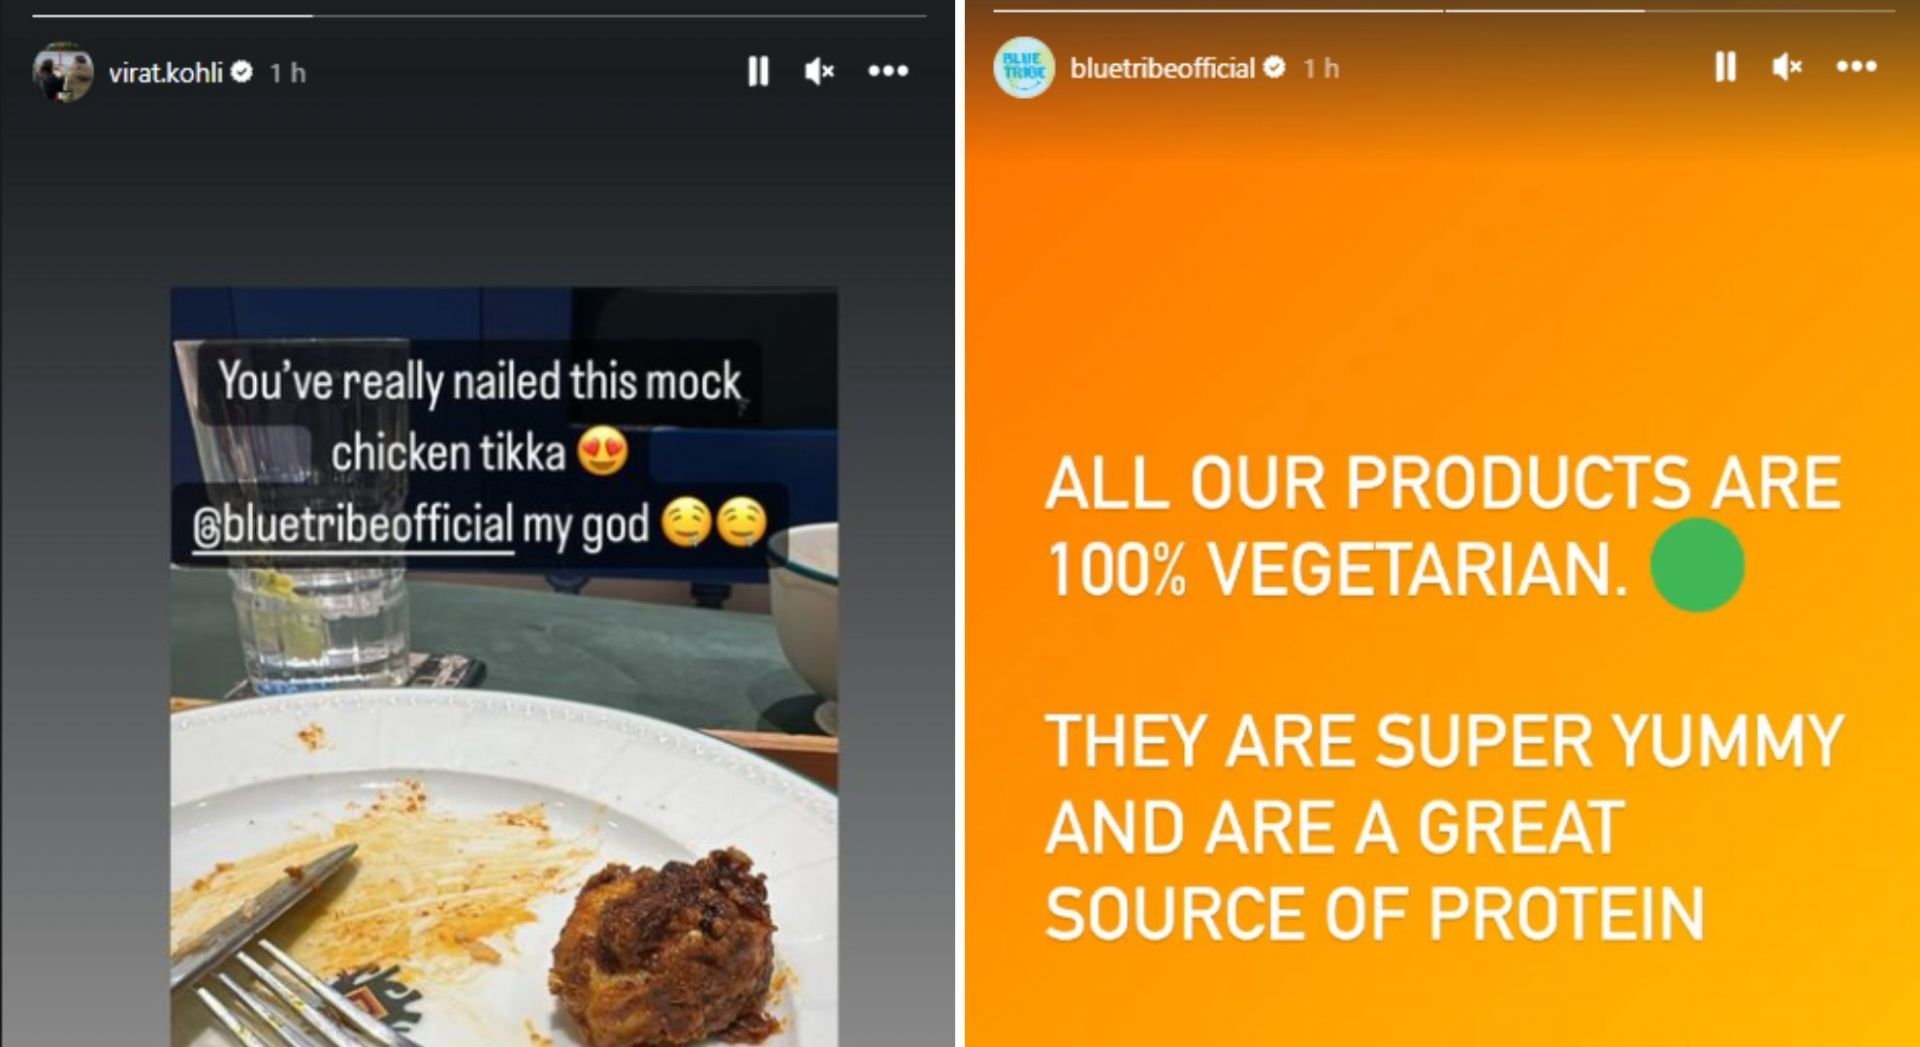 Virat Kohli shared a snap of plant-based meat on his latest Instagram story.